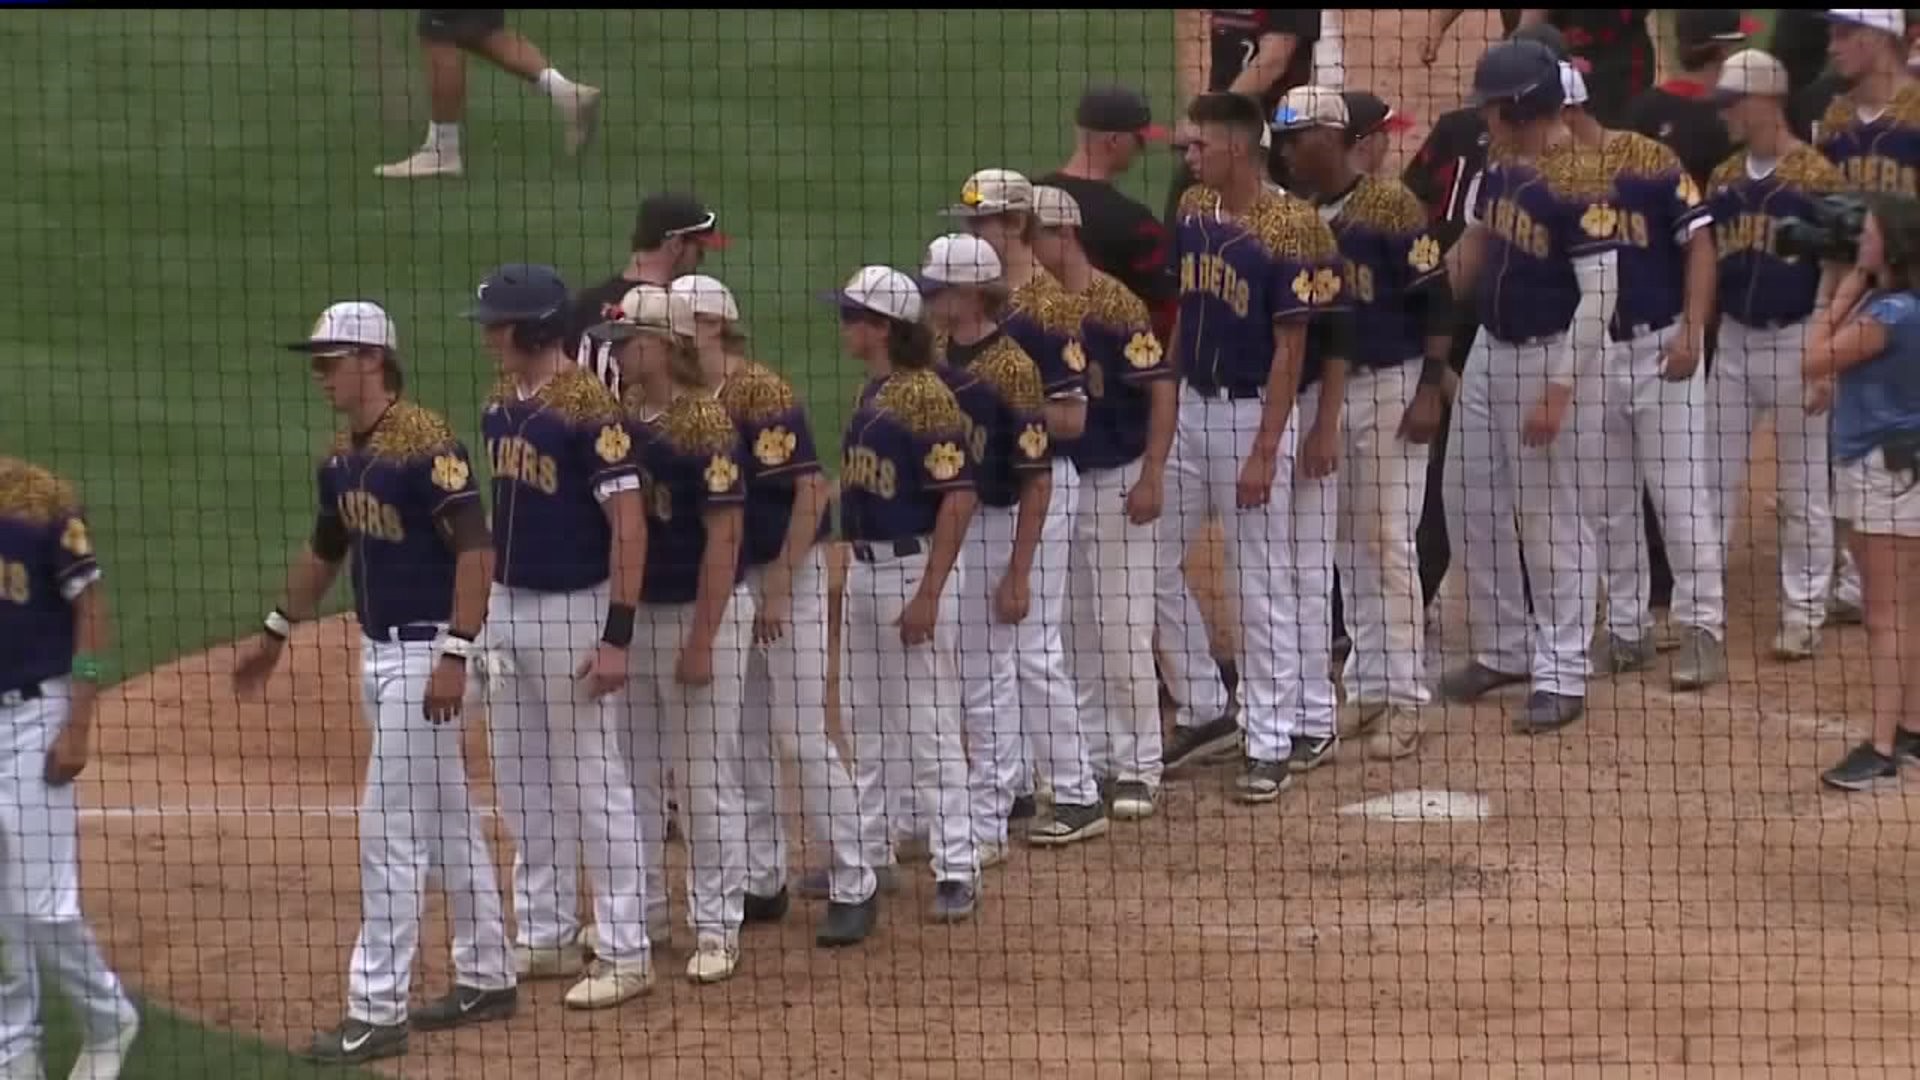 Central DeWitt with a big 11-1 win over Centerville